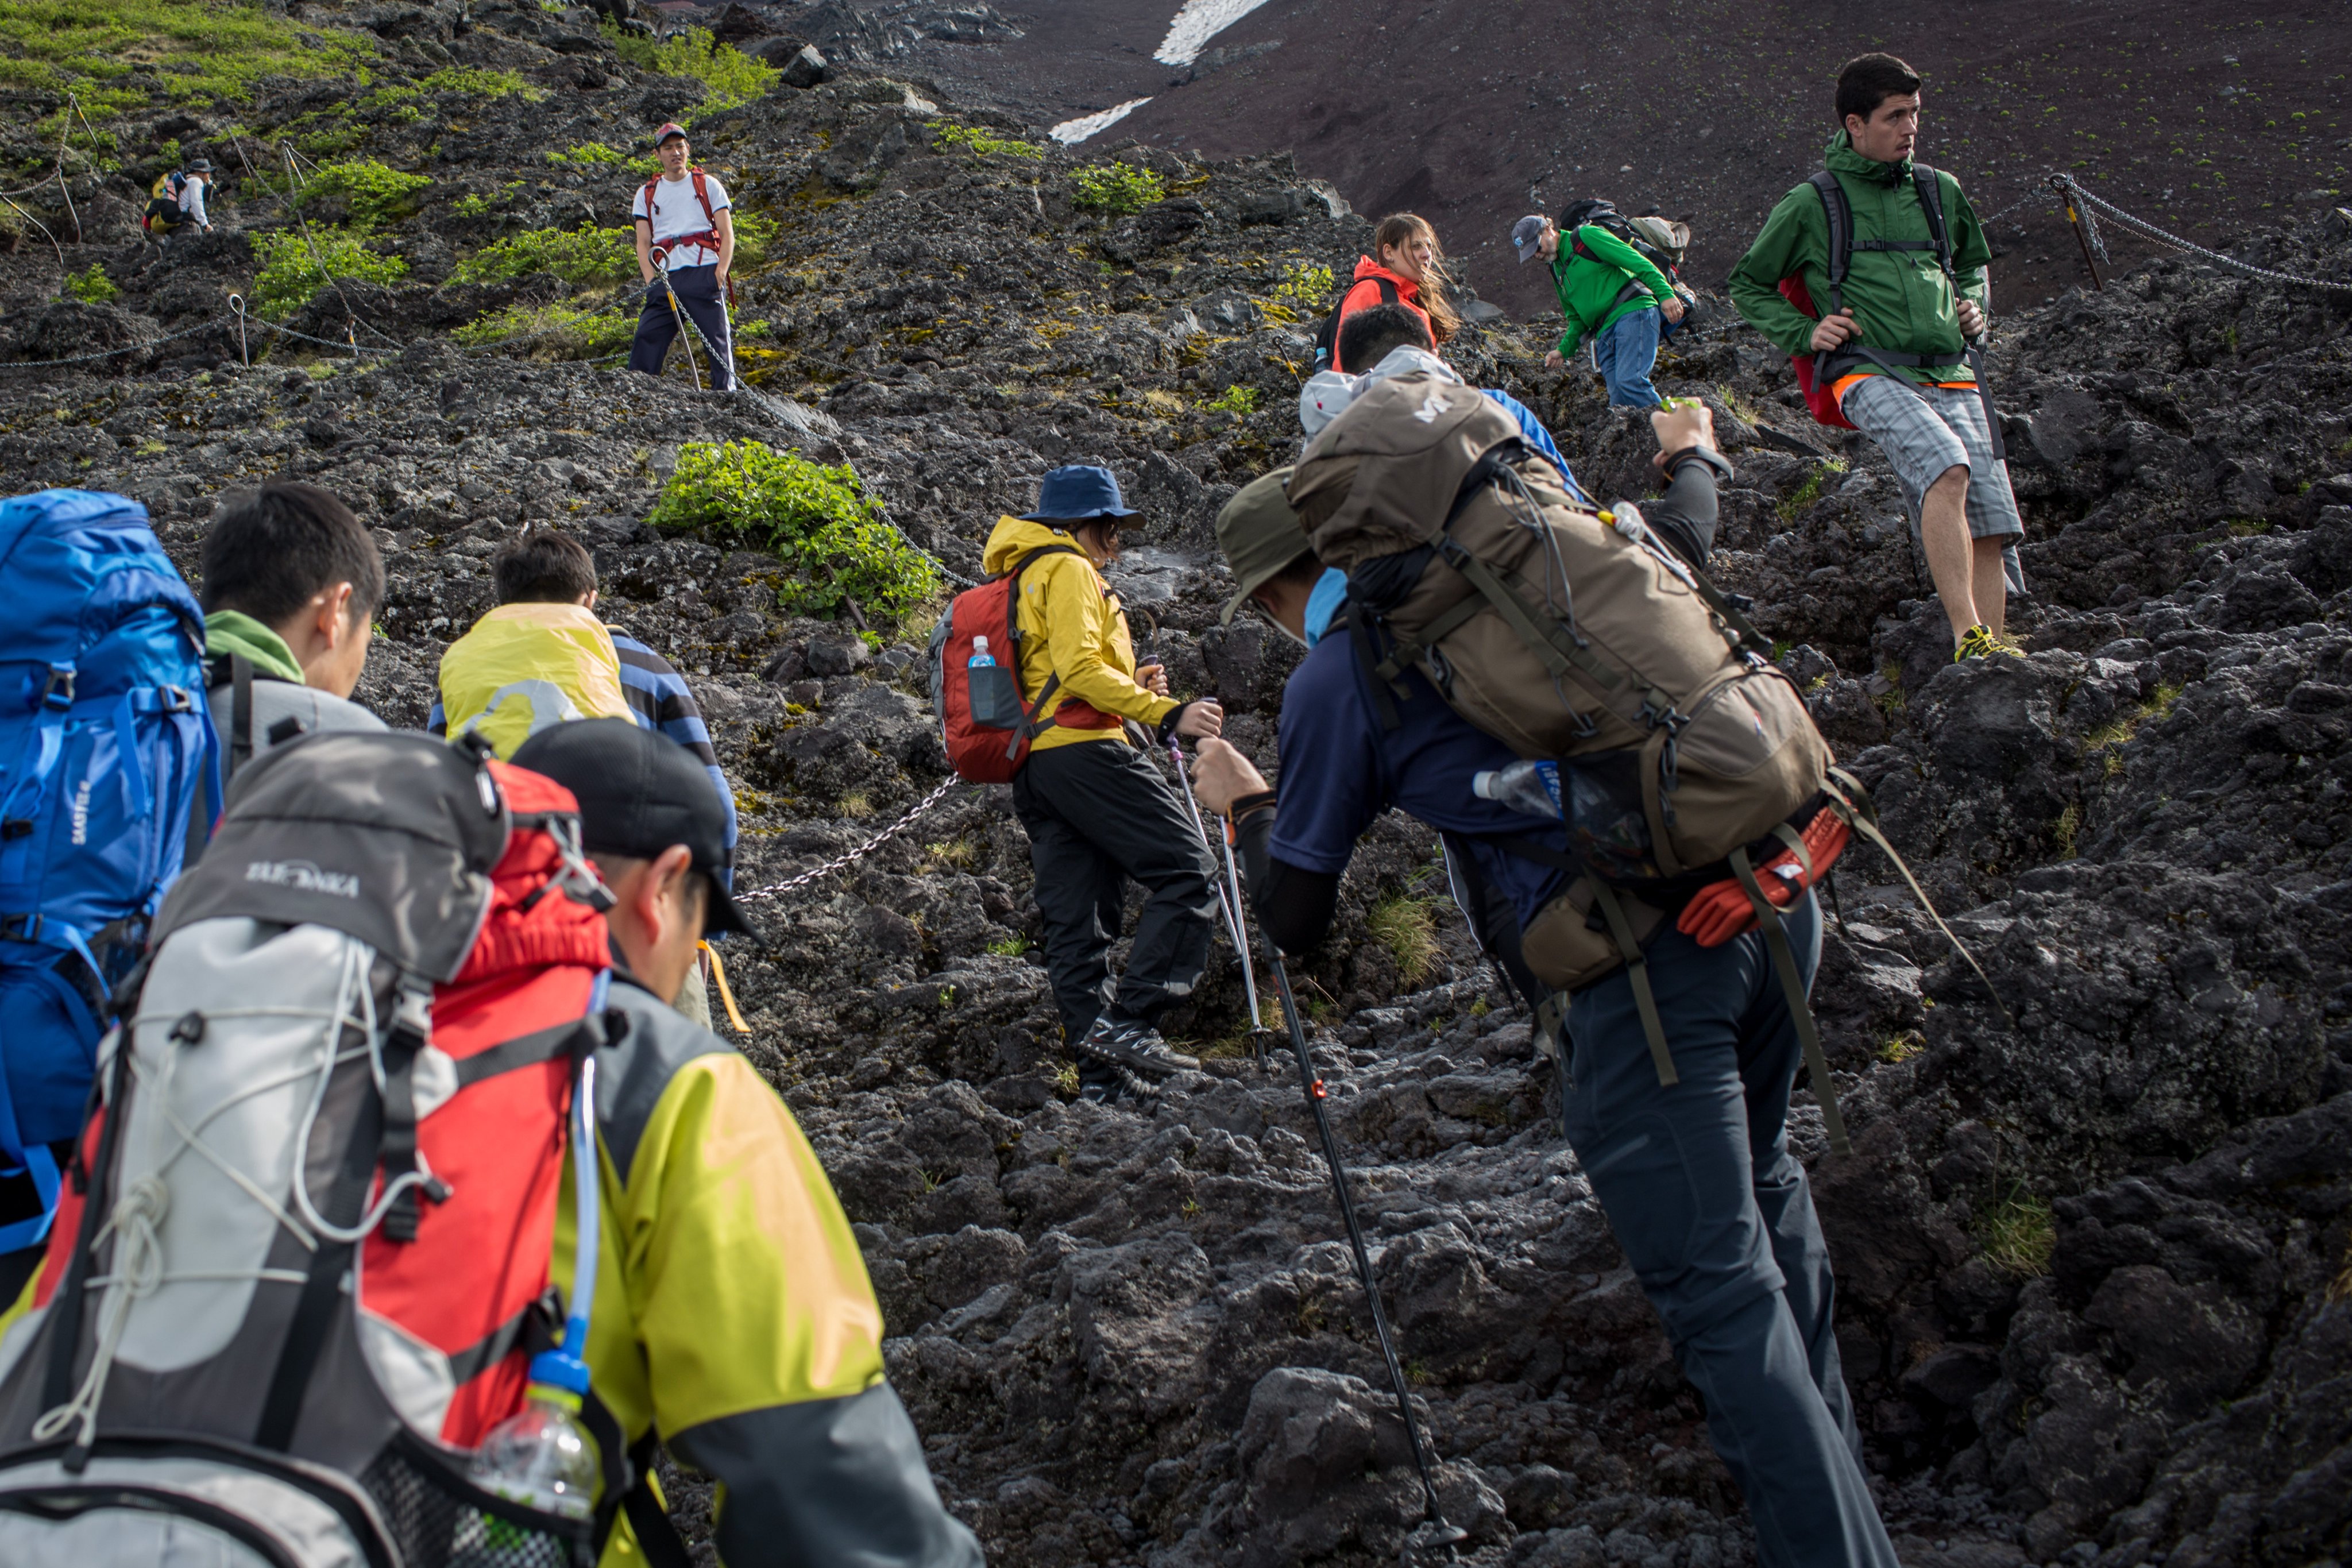 Climbers hike up Mount Fuji, Japan’s highest peak. Congestion is common on trails during the summer climbing season, but could be worse than ever in 2023. Climbers typically rest in mountain huts, but demand for beds will exceed supply this year, part of a general accommodation crunch in Japan. Photo: Chris McGrath/Getty Images